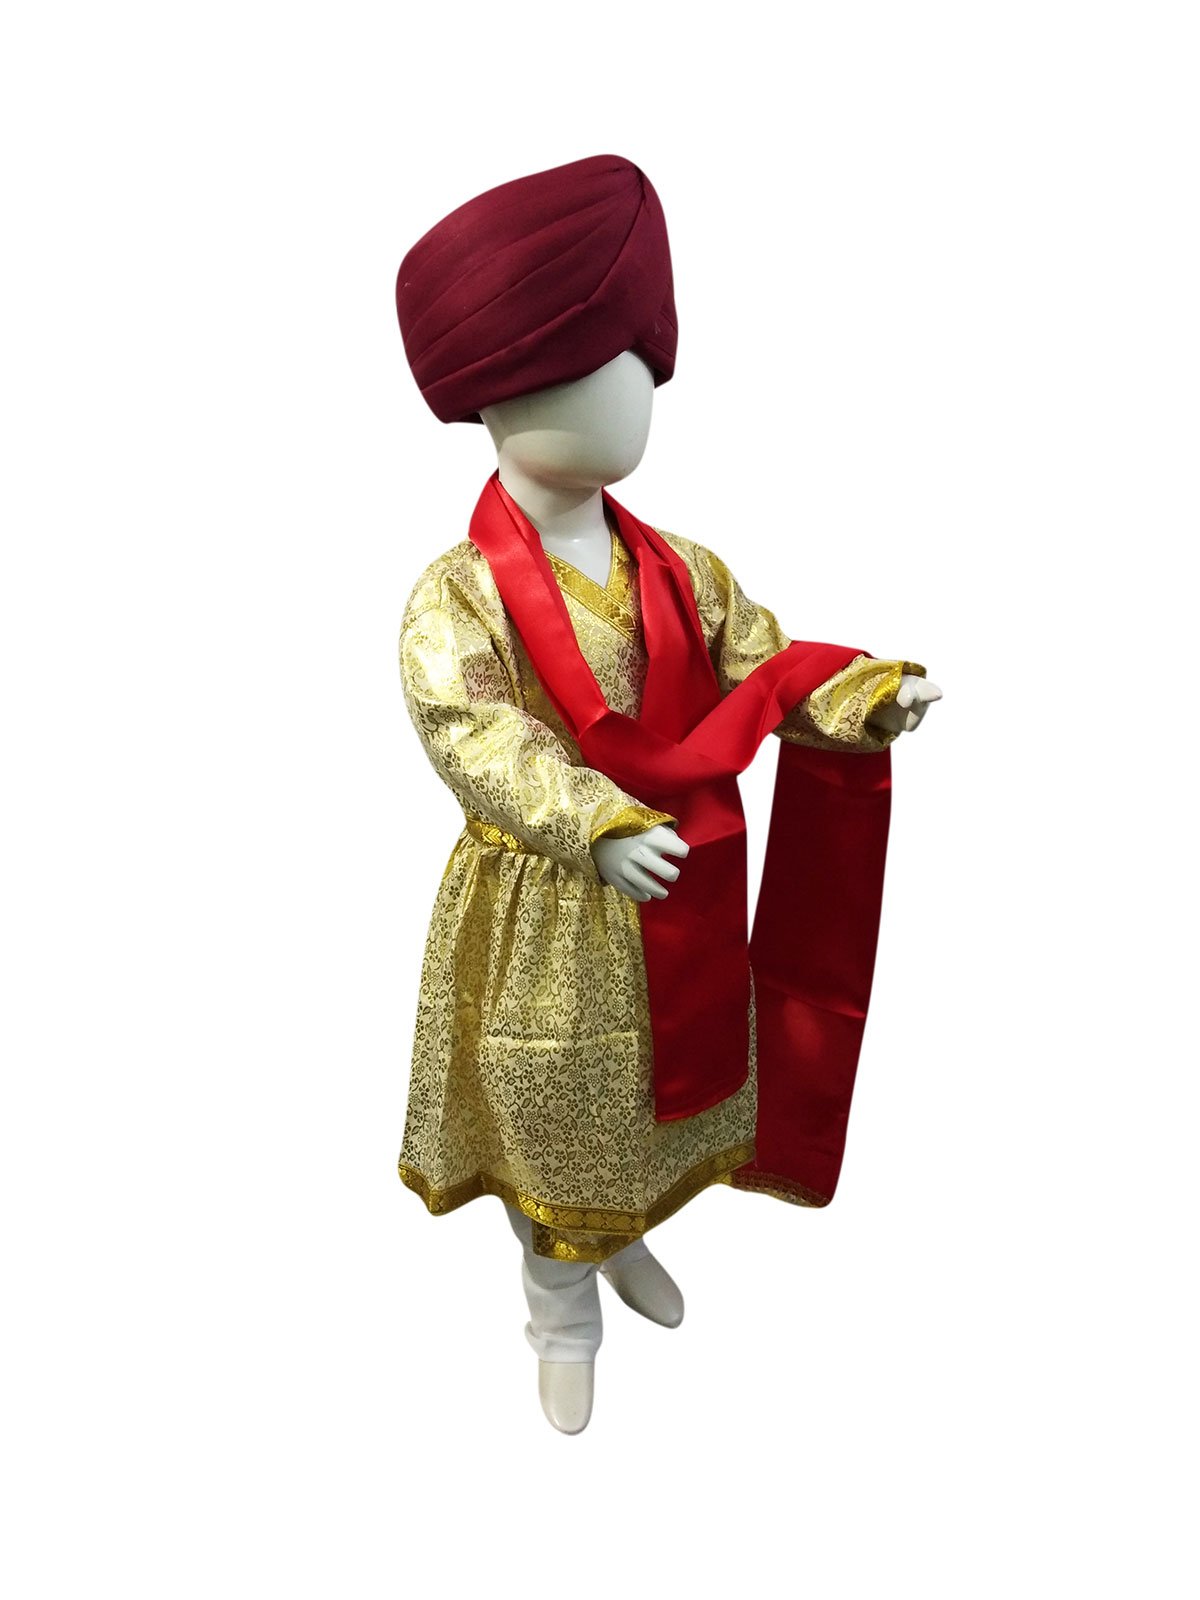 Buy BookMyCostume Beige Indian Dulha Pagdi Indian Wedding Turban for Kids  2-10 Years Online at Low Prices in India - Amazon.in